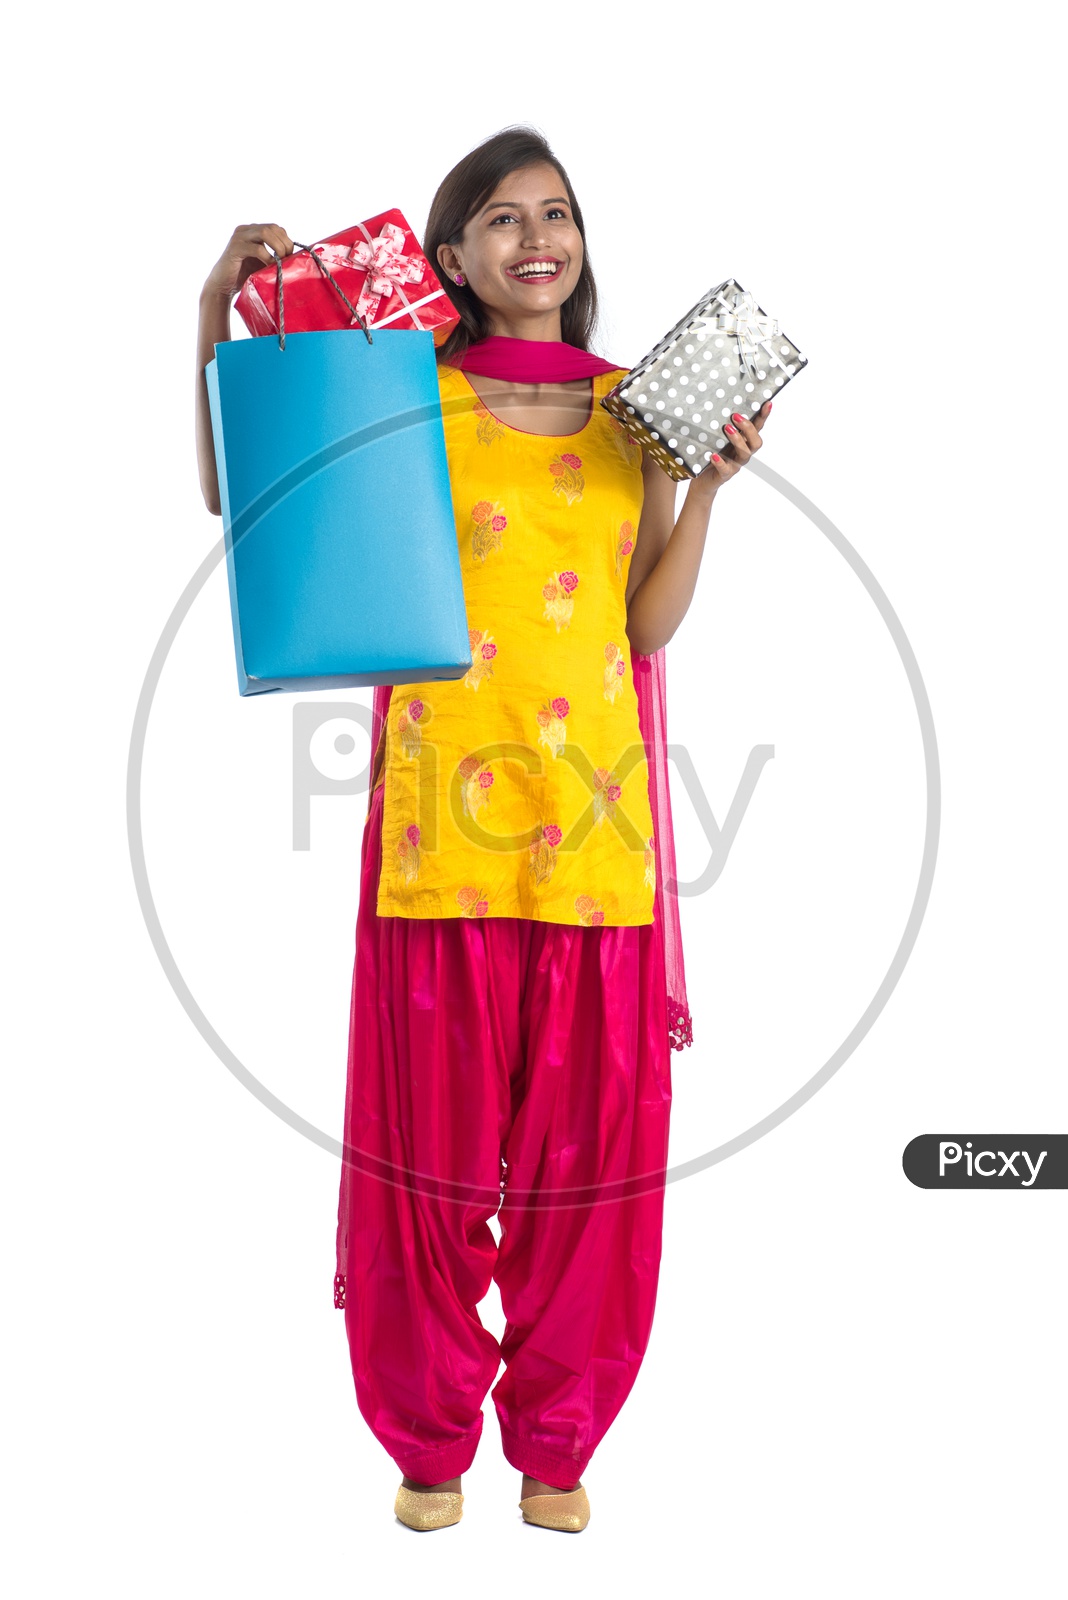 Young Indian Woman Or Girl Happily Smiling With Shopping Bags Gifts  On an Isolated White background